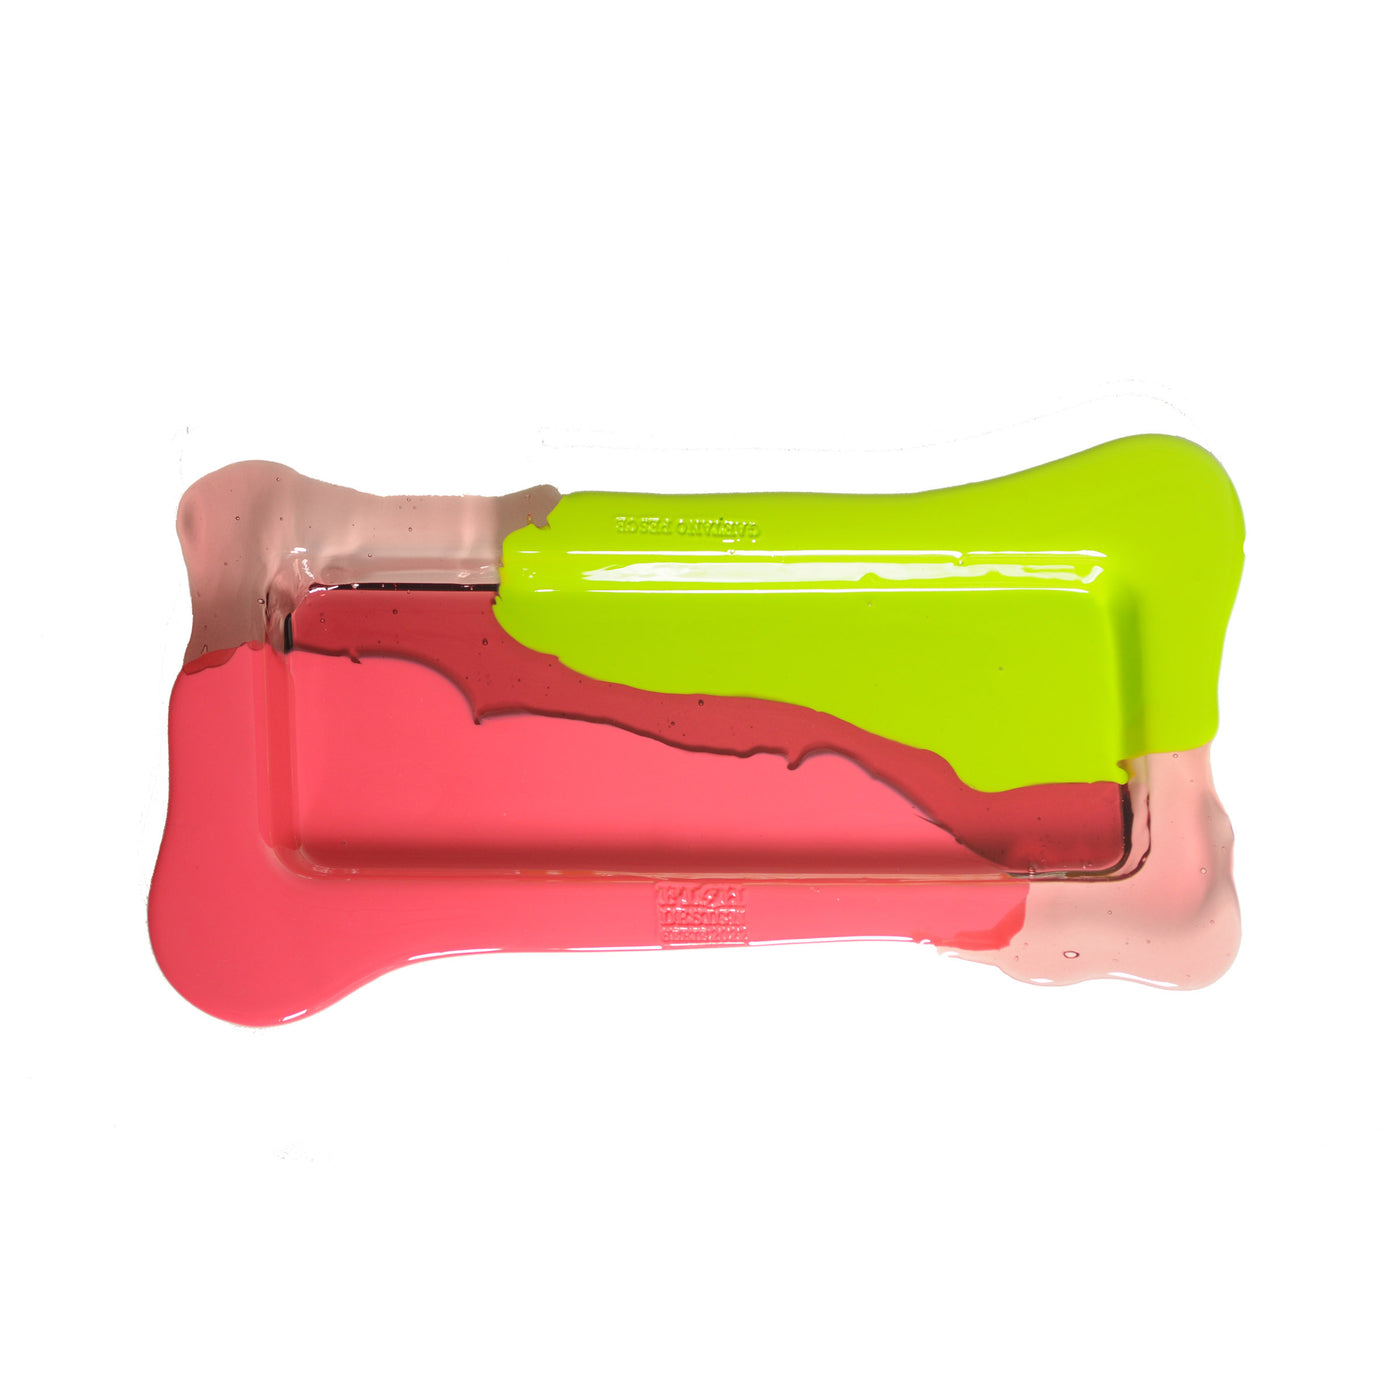 Resin Rectangular Tray TRY-TRAY Pink by Gaetano Pesce for Fish Design 01